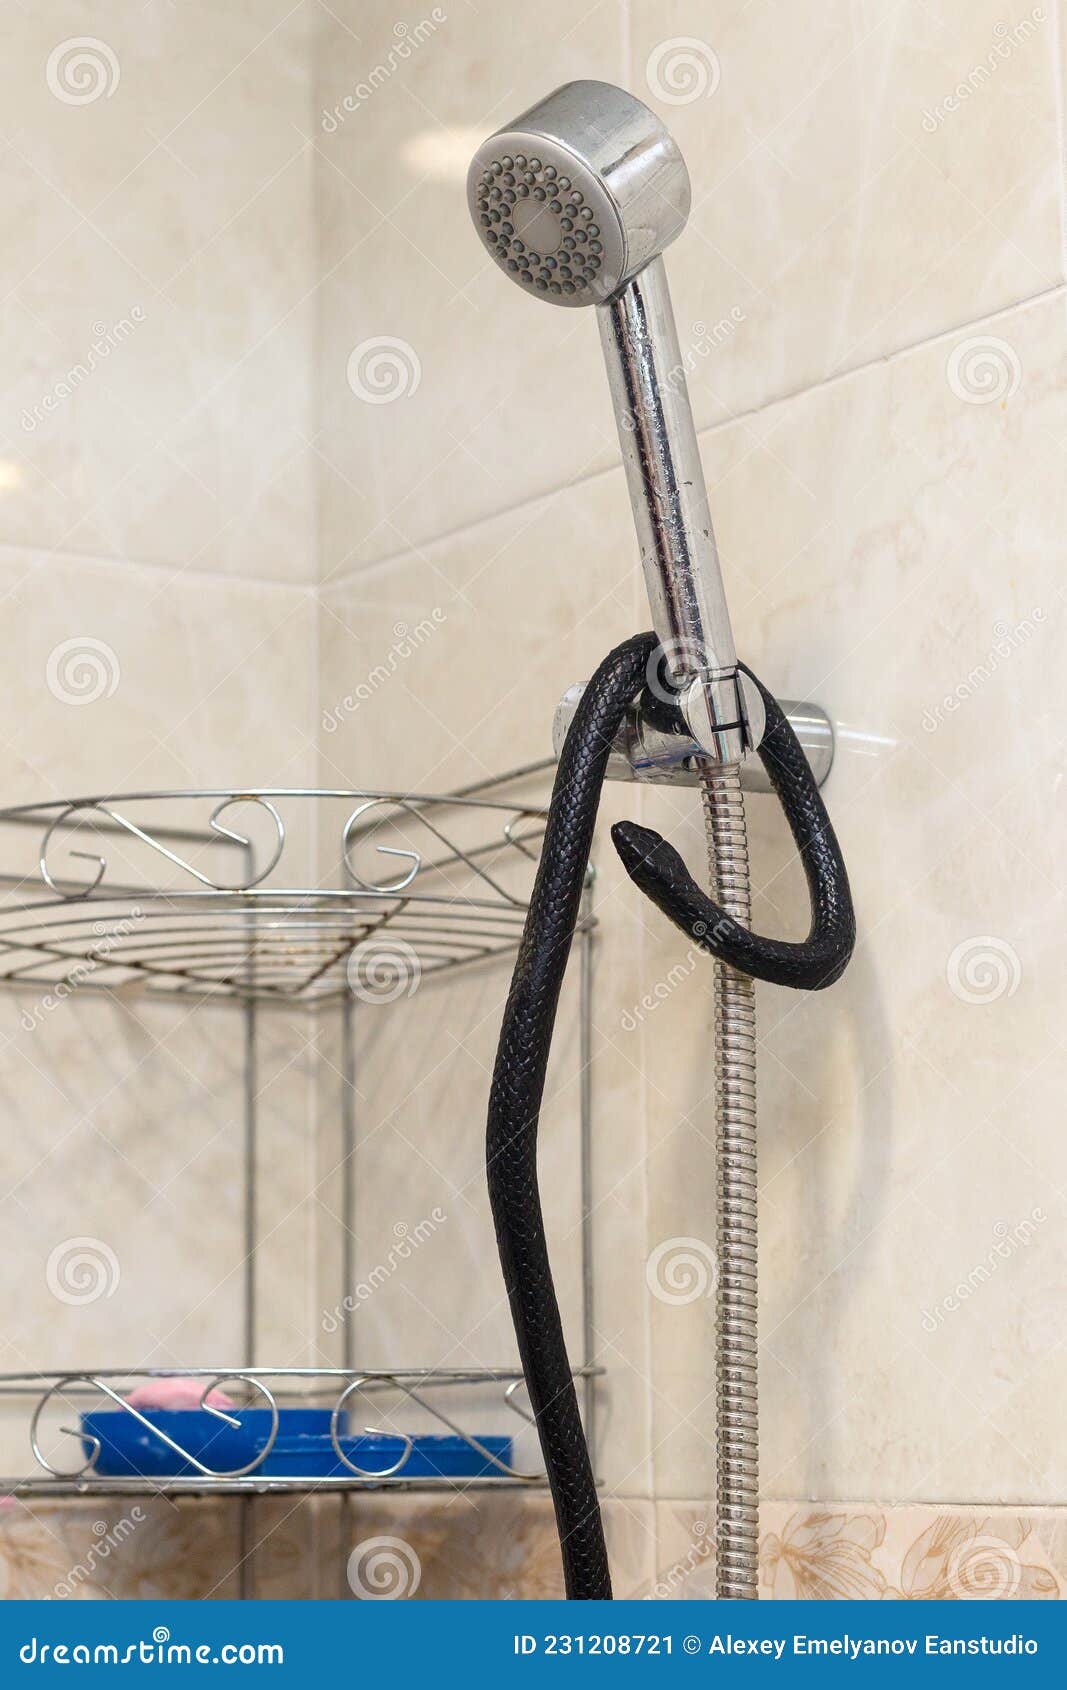 https://thumbs.dreamstime.com/z/poisonous-snake-bathroom-wrapped-around-shower-231208721.jpg